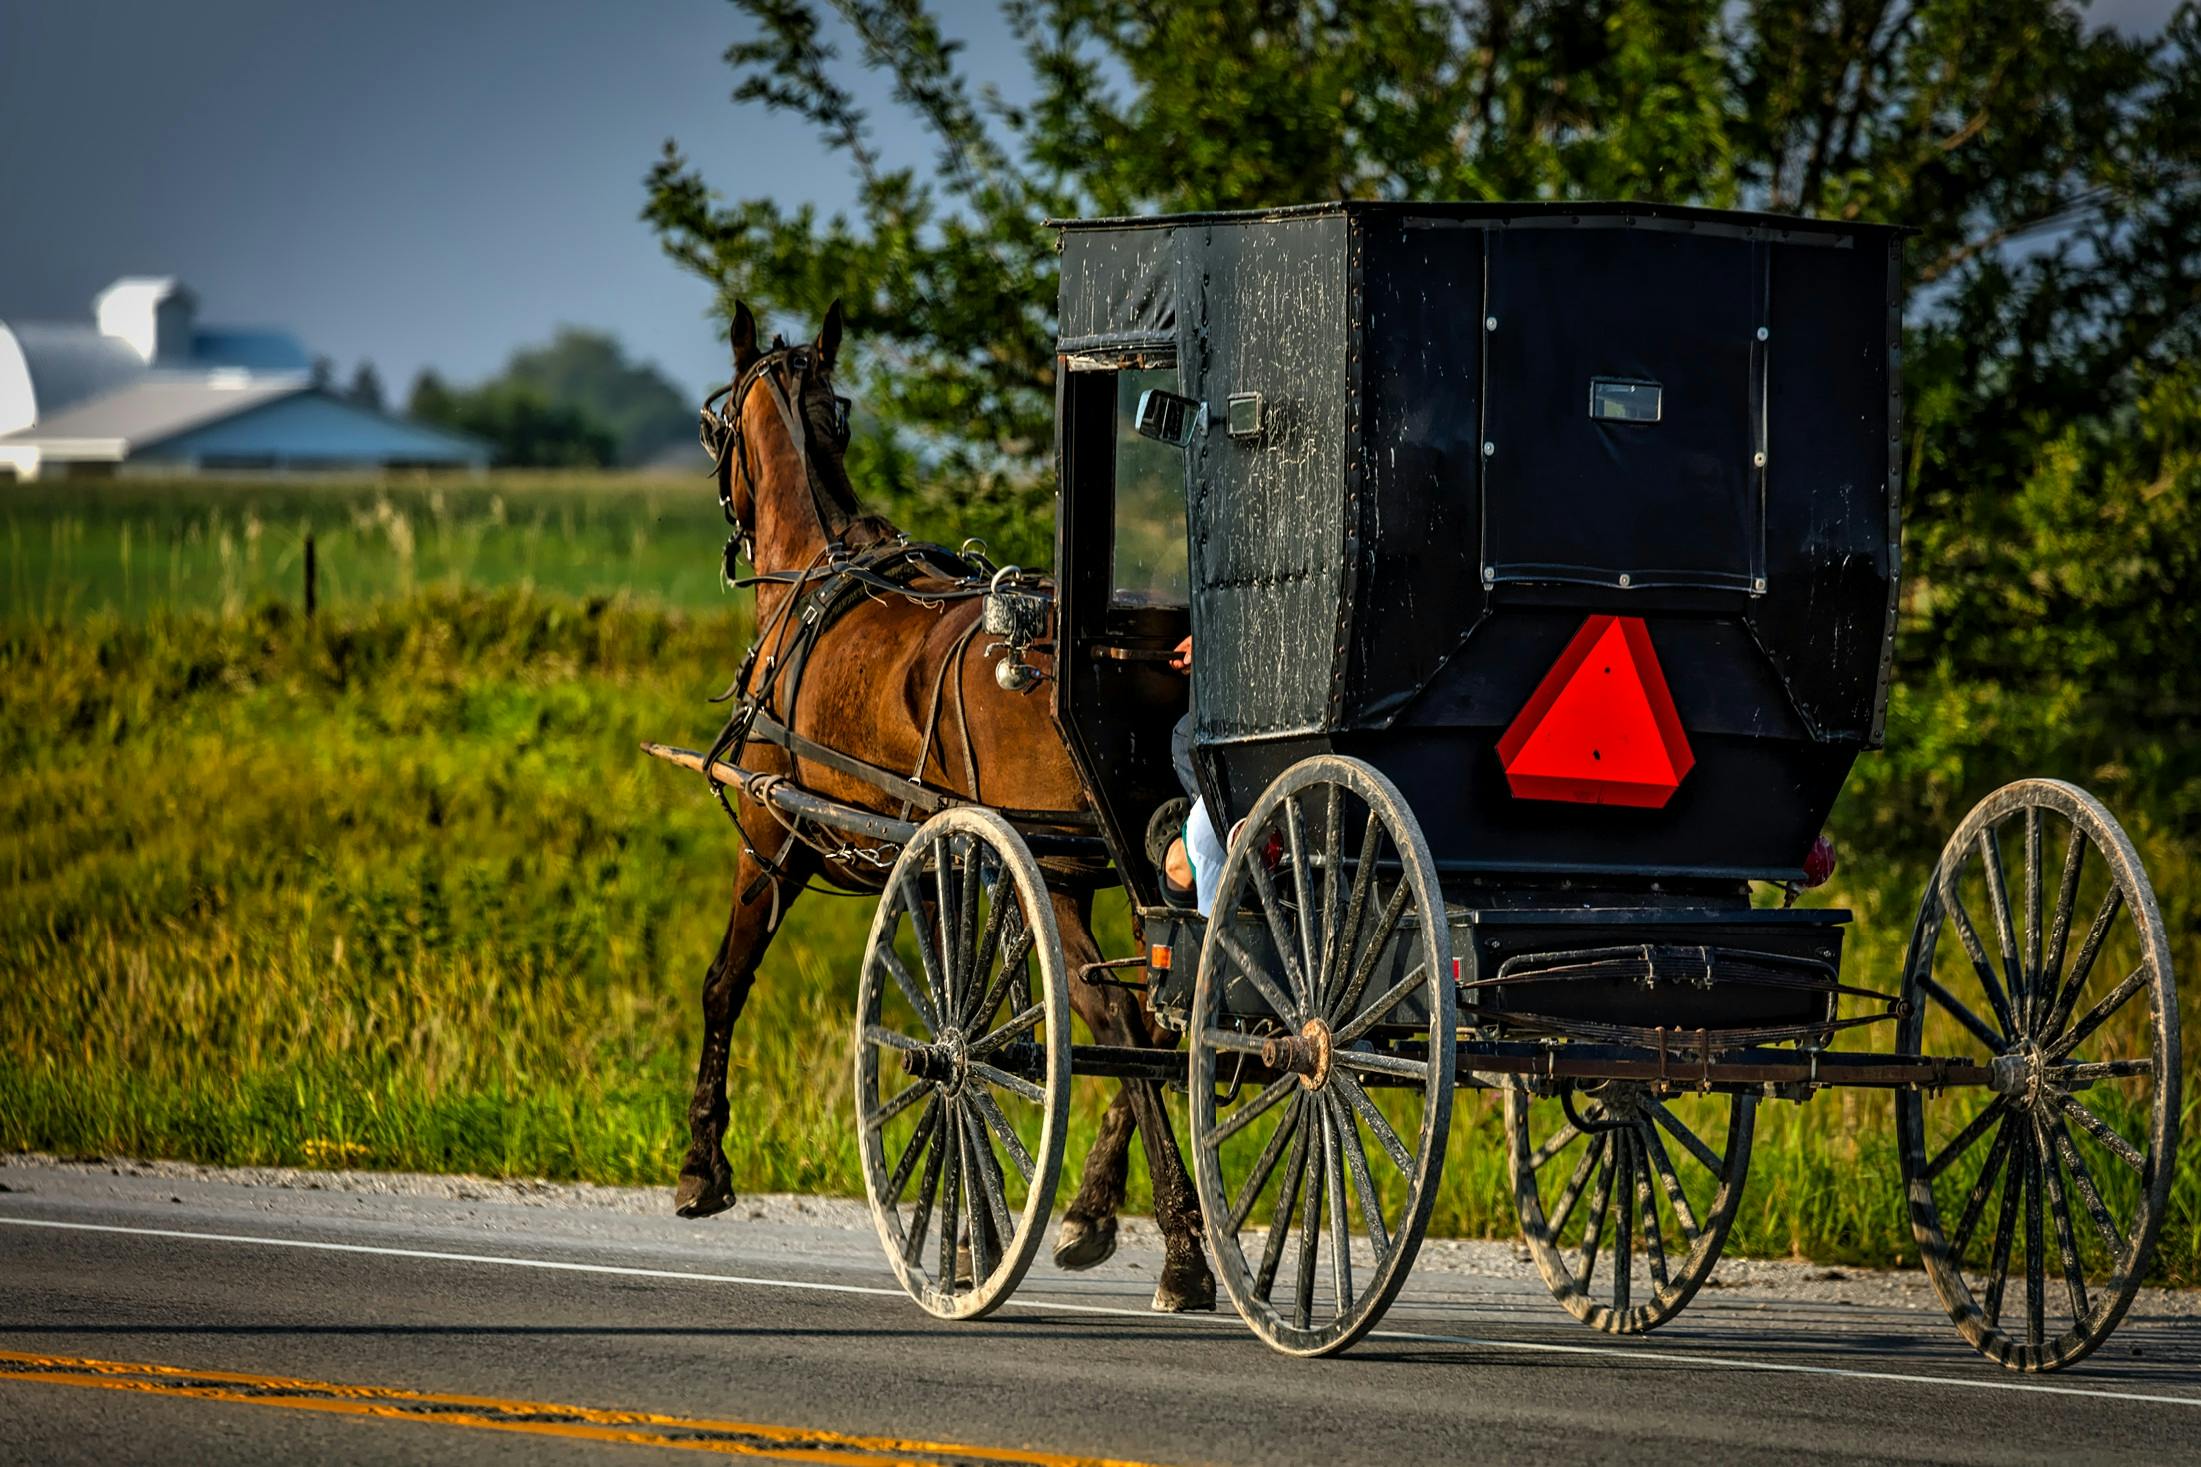 Image result for amish buggy free image"